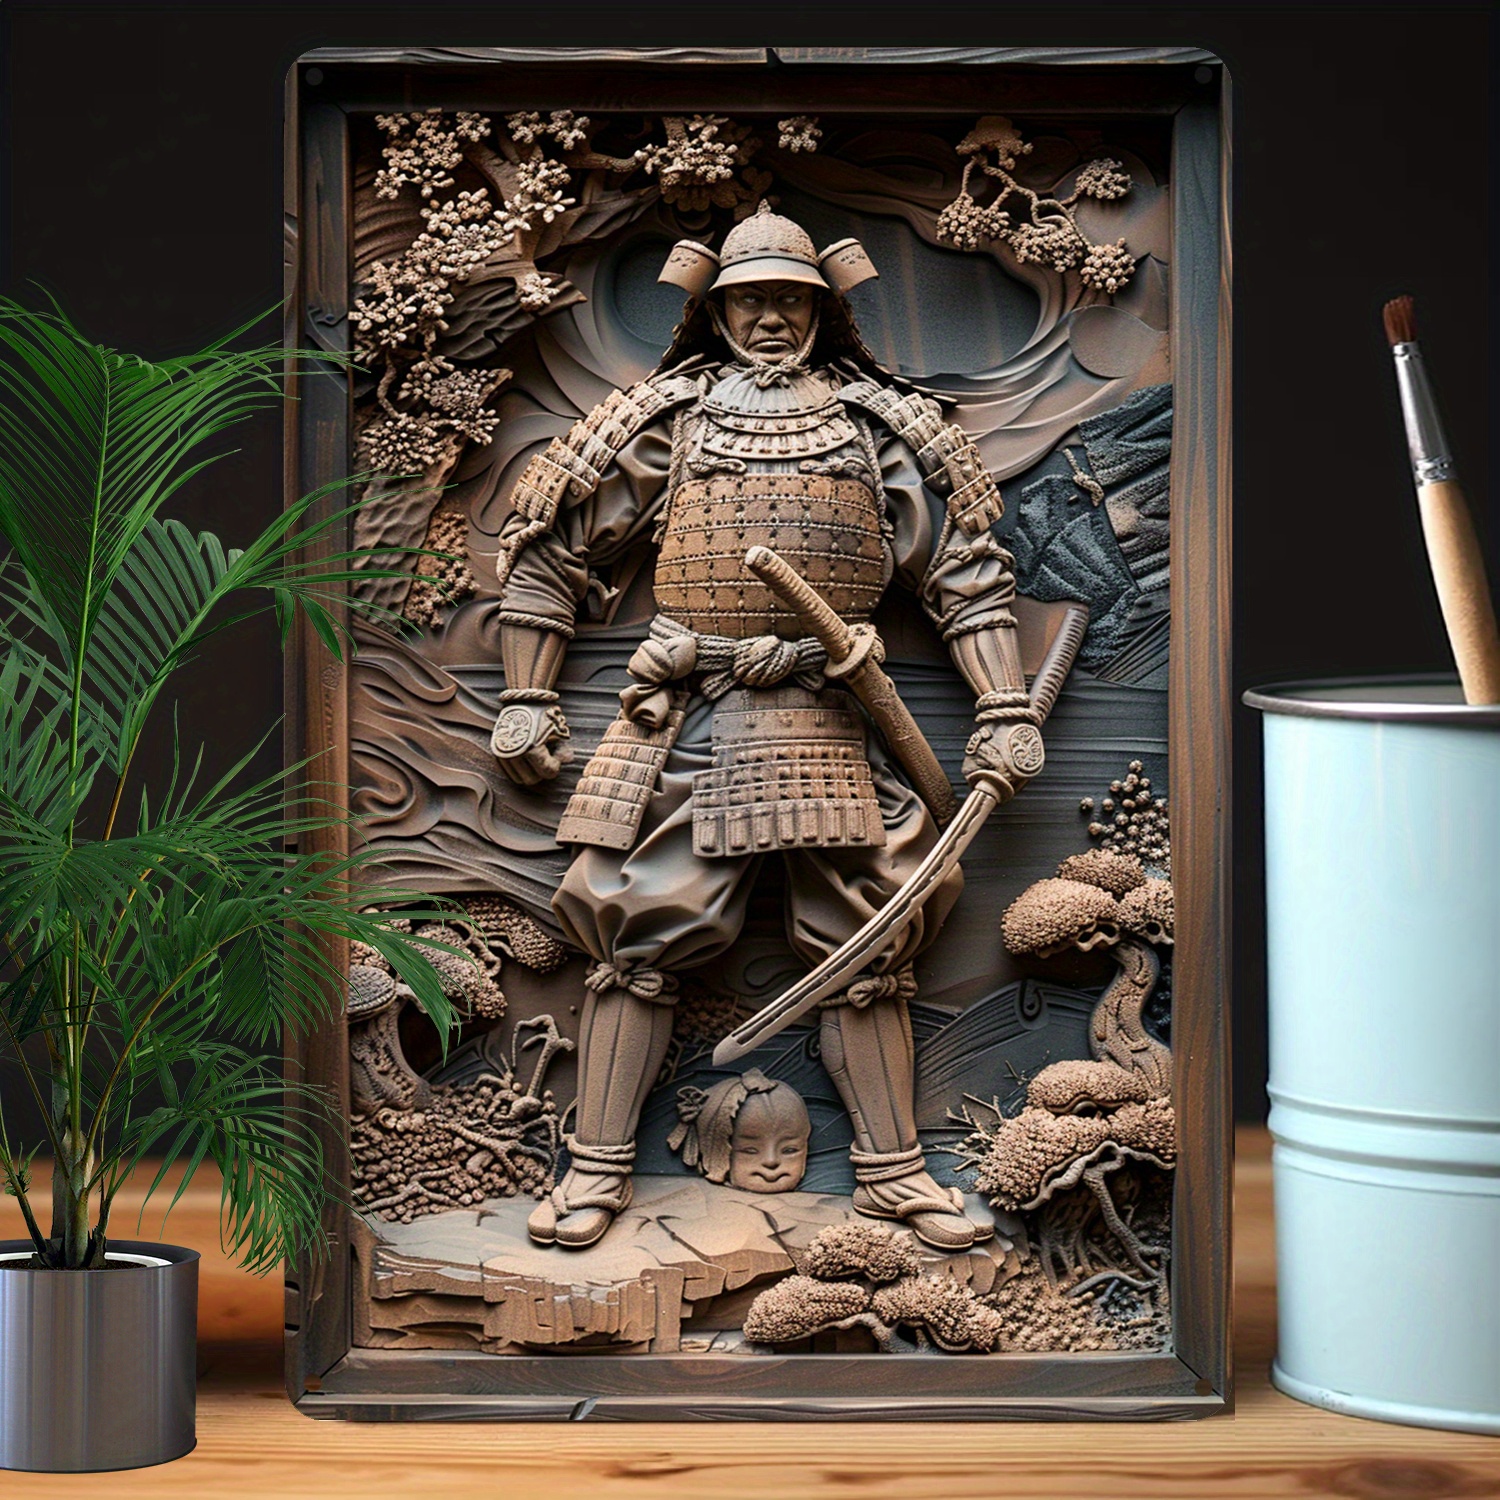 

1pc Samurai Of Japan Theme Aluminum Metal Art - 8x12 Inch Moisture Resistant 3d Relief Tin Sign With Higher Bending Resistance - Durable Wall Decor For Home, Gym, Studio, Classroom - Gift A3244